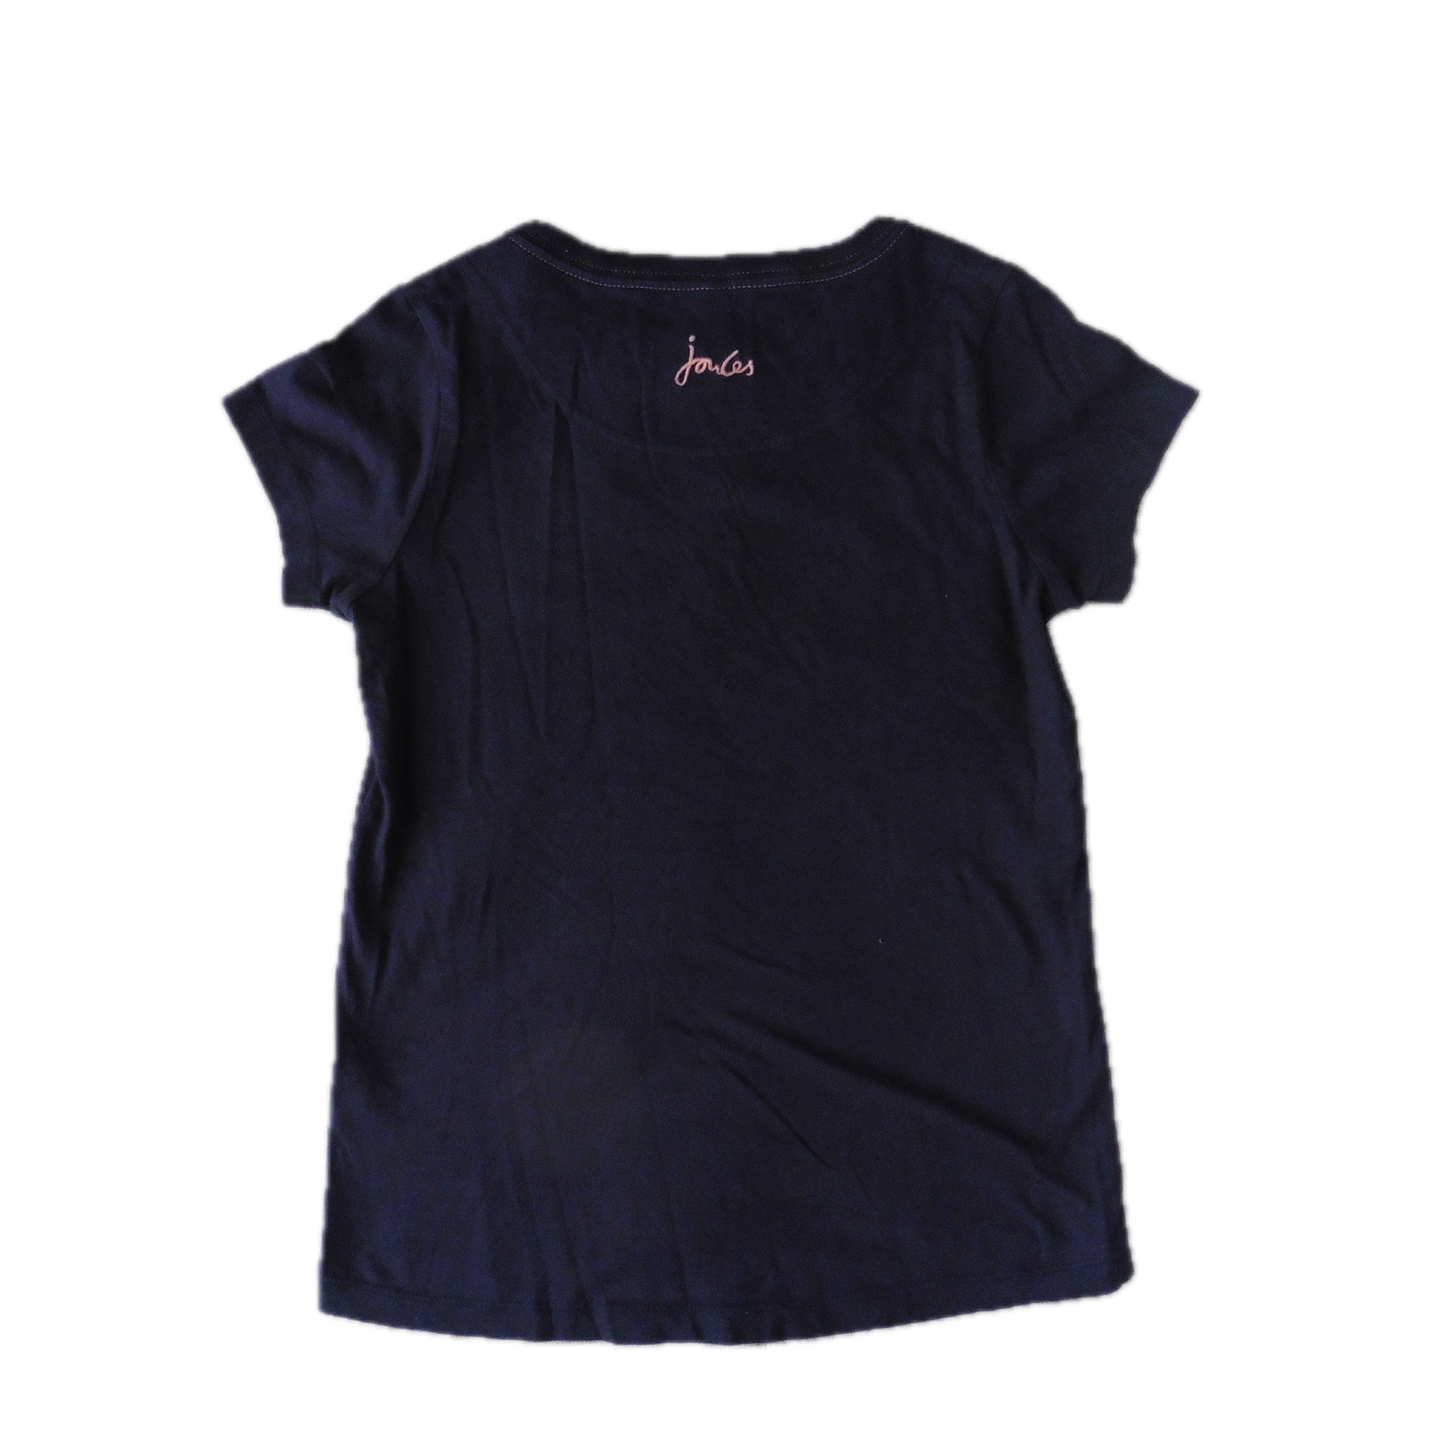 Preloved Joules Navy T-shirt with Unicorn 9y